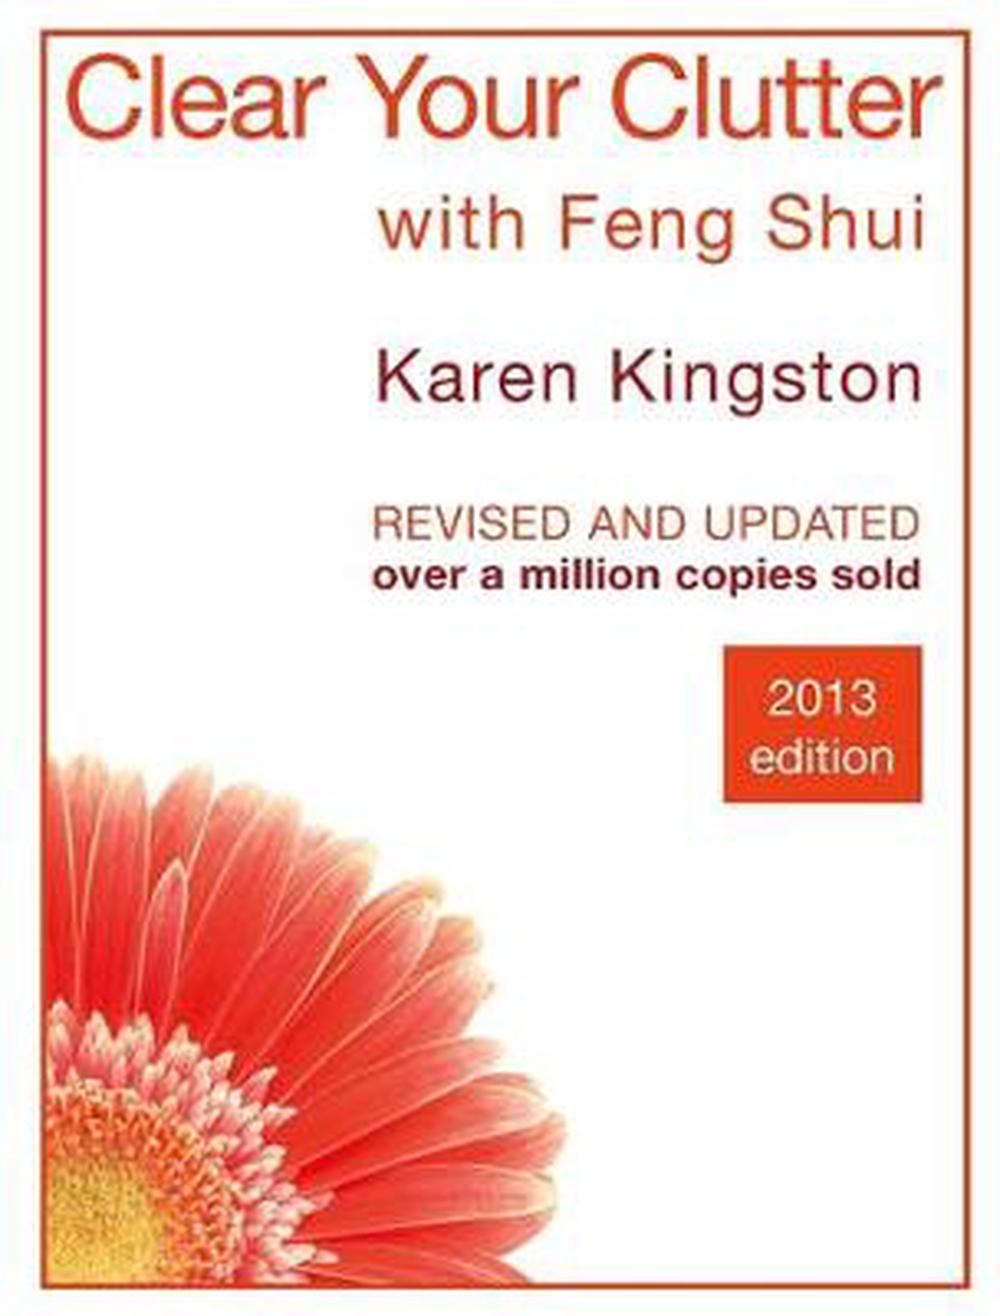 clear your clutter with feng shui audiobook